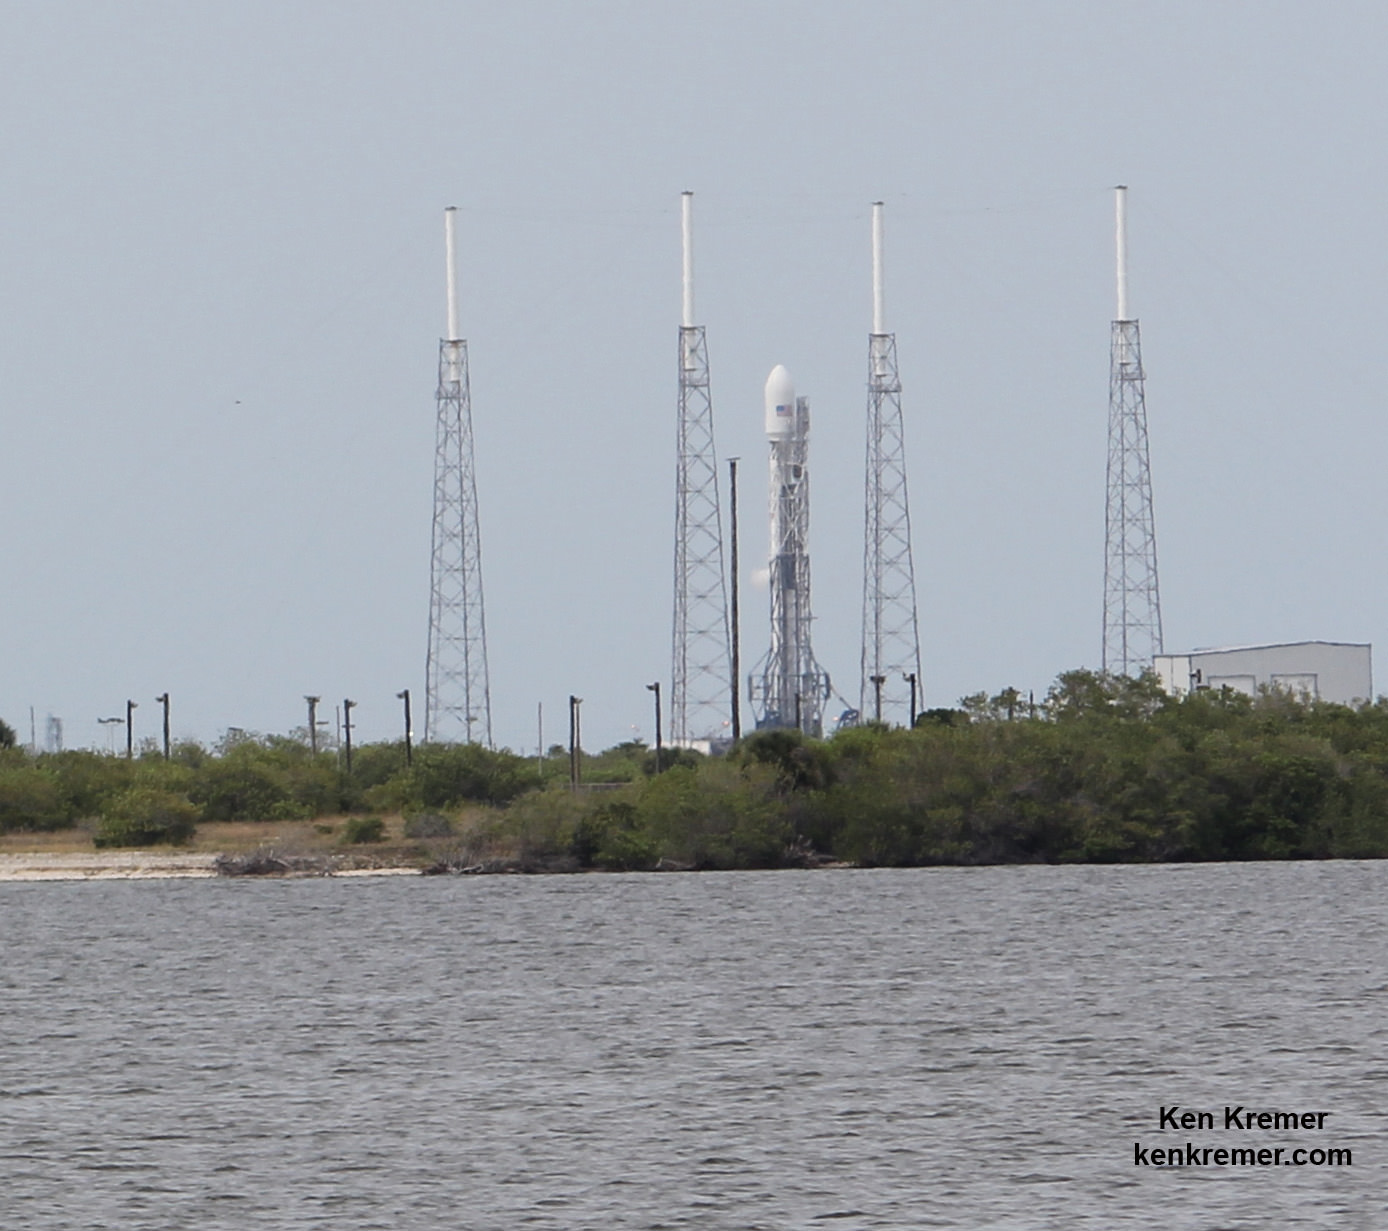 File photo of SpaceX Falcon 9 rocket after successful static hot-fire test on June 13, 2014 on Pad 40 at Cape Canaveral, FL with ORBCOMM OG2 mission with six OG2 satellites. Credit: Ken Kremer/kenkremer.com